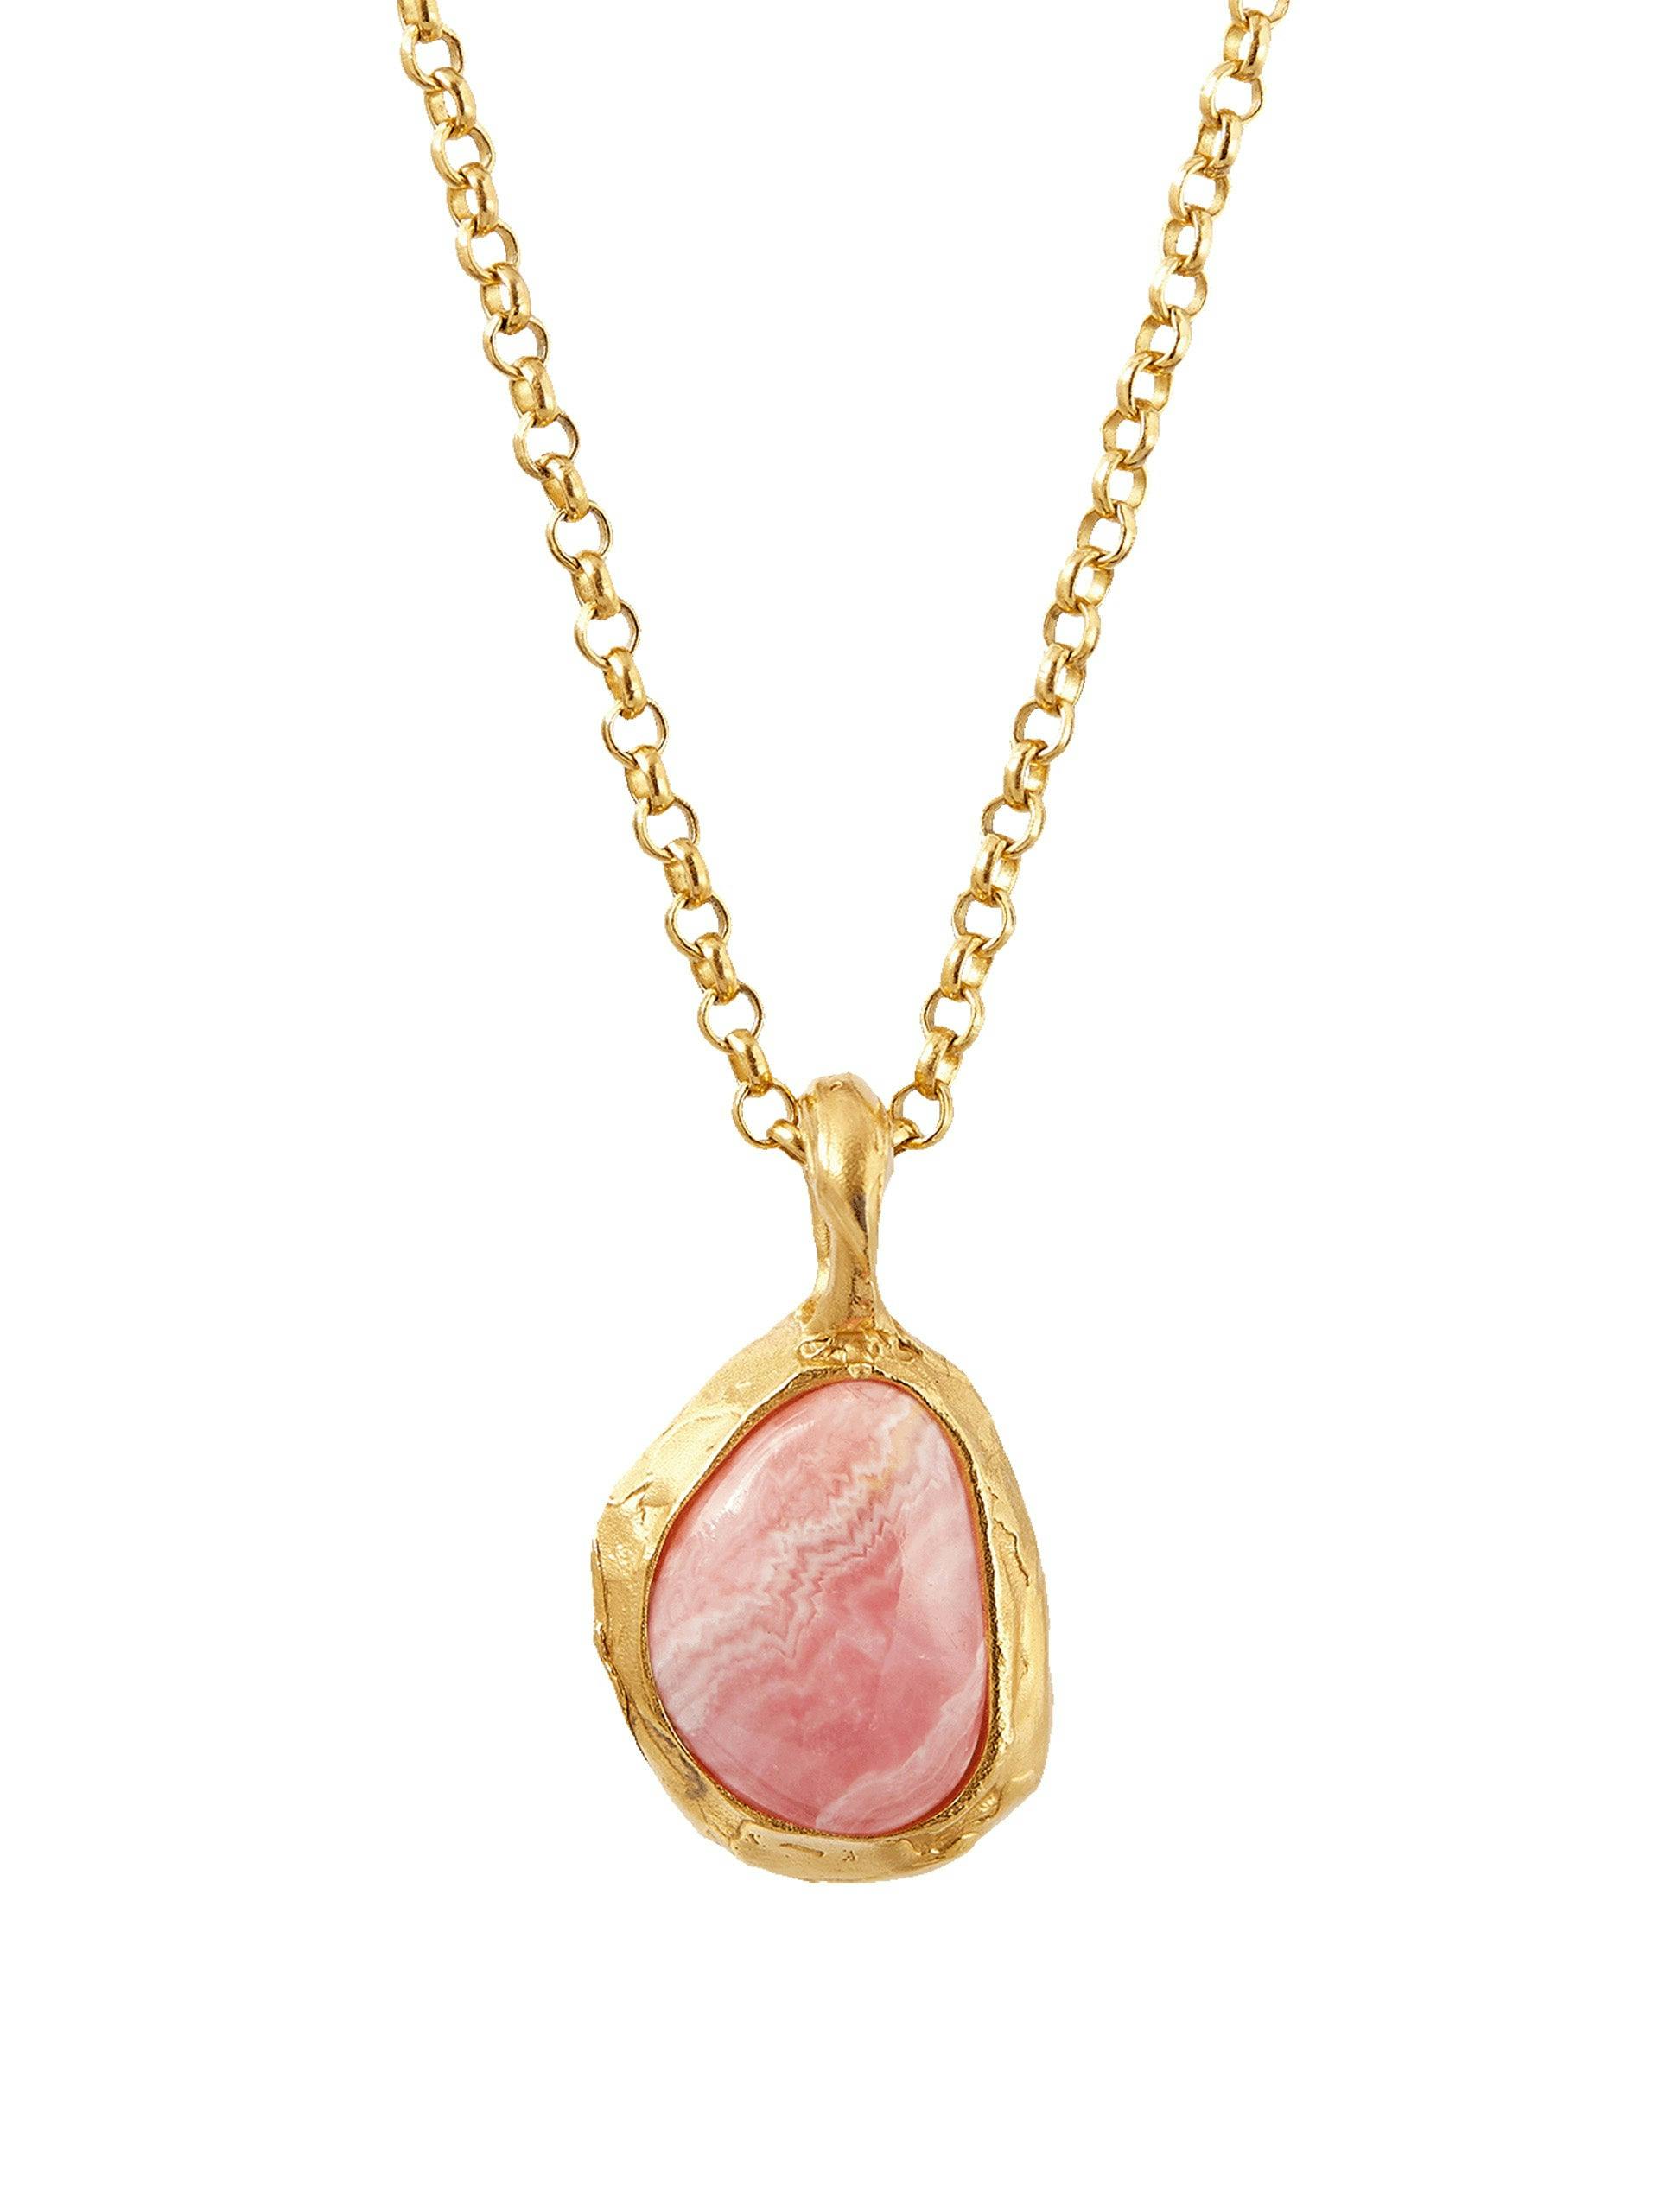 The Droplet of Skies rhodochrosite necklace